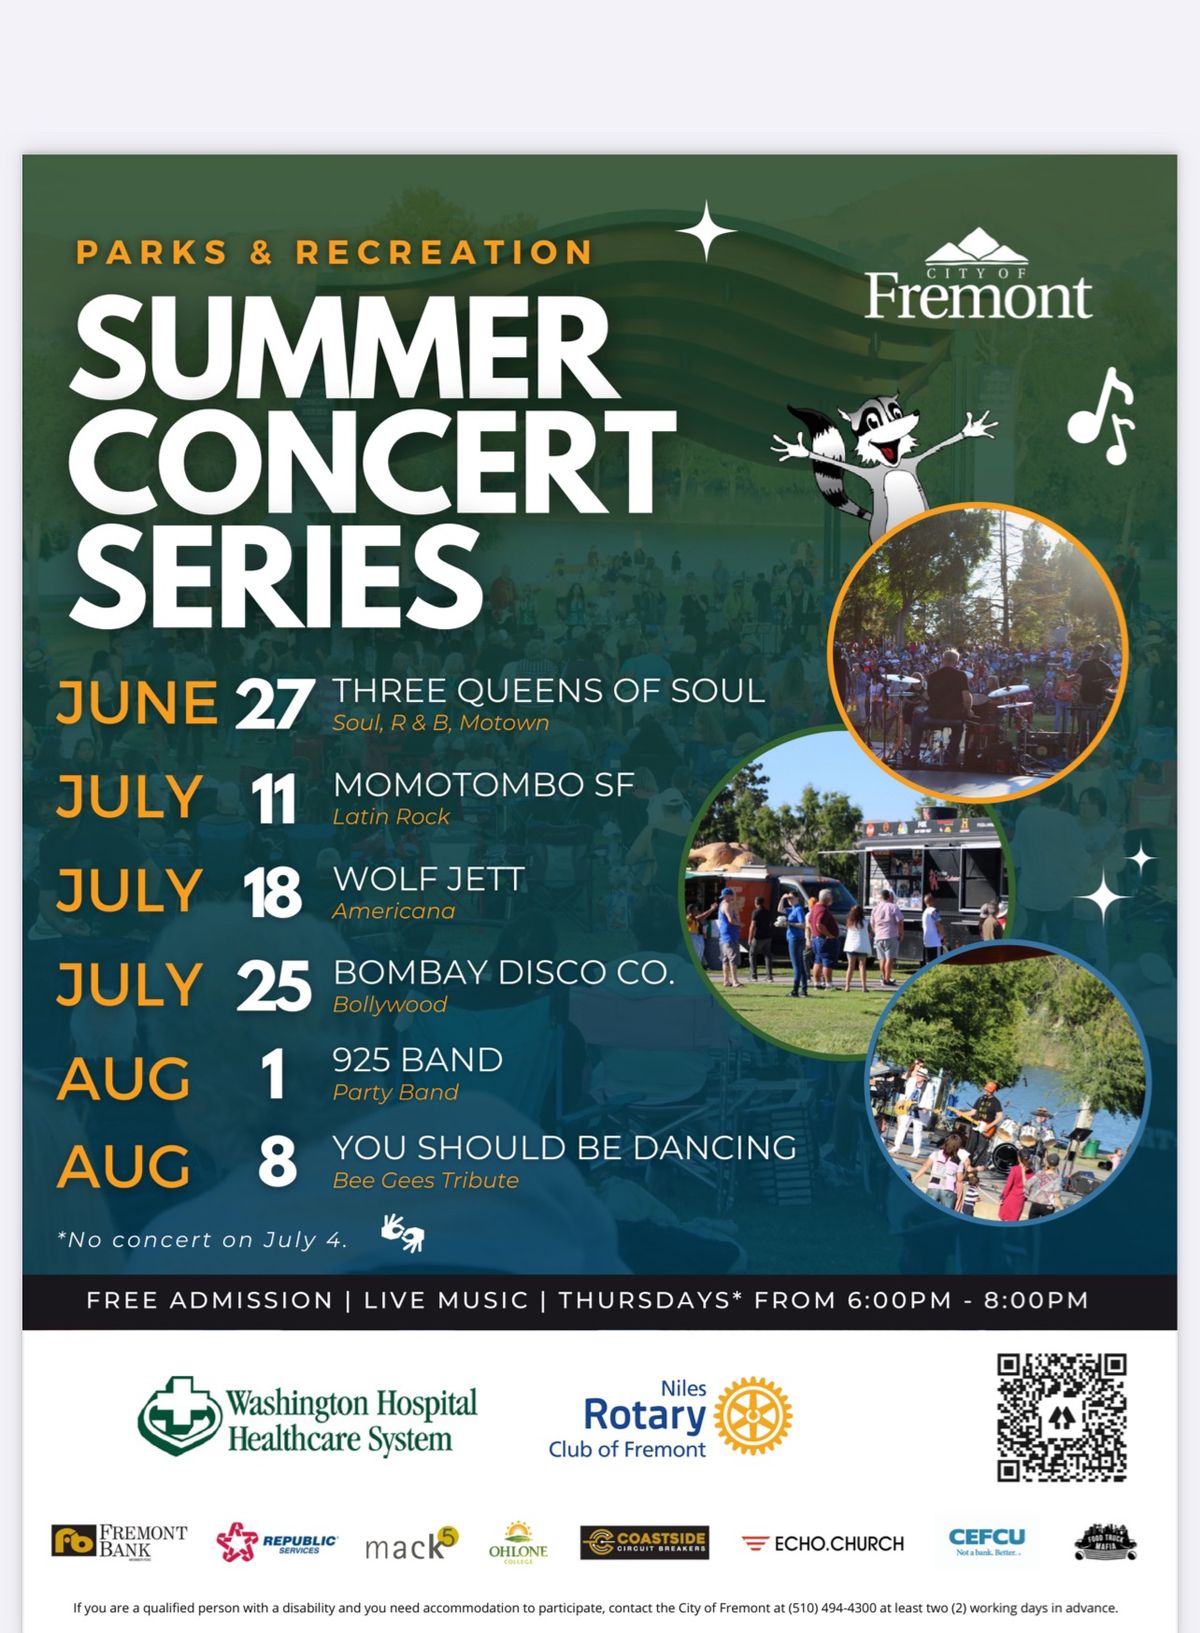 Momotombo-SF Featuring Former Members of Malo and Santana at The Fremont Summer Concert Series!